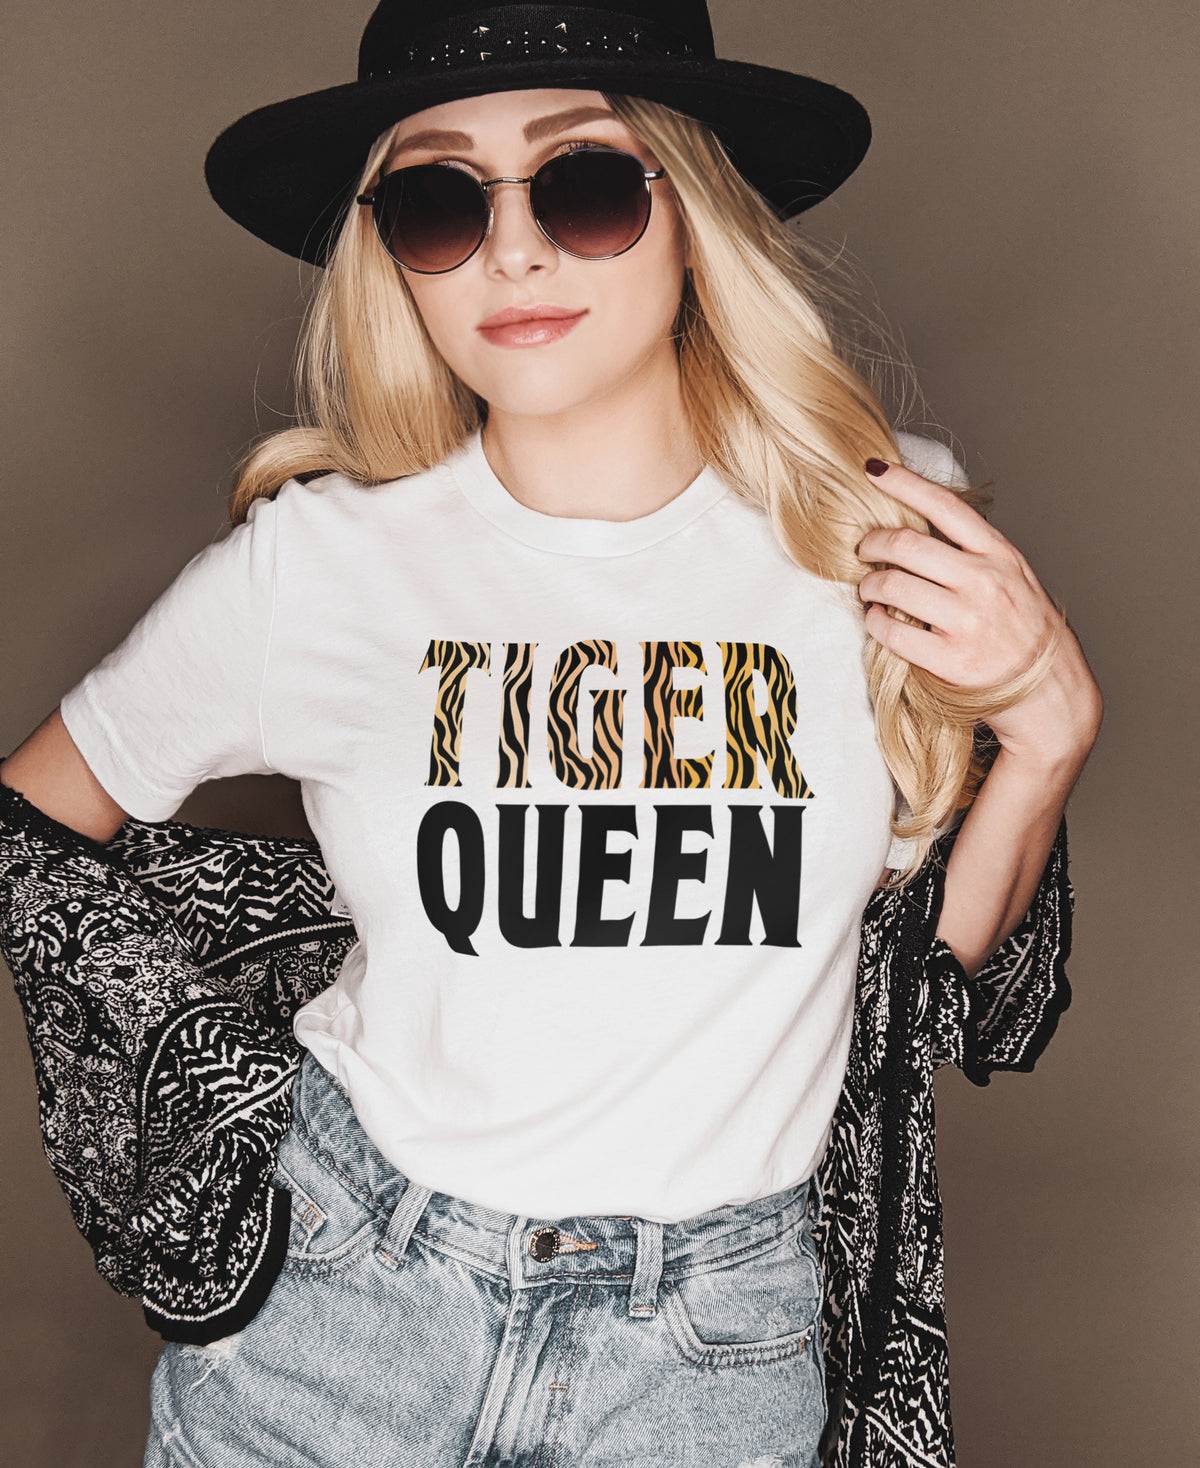 White shirt that says tiger queen - HighCiti